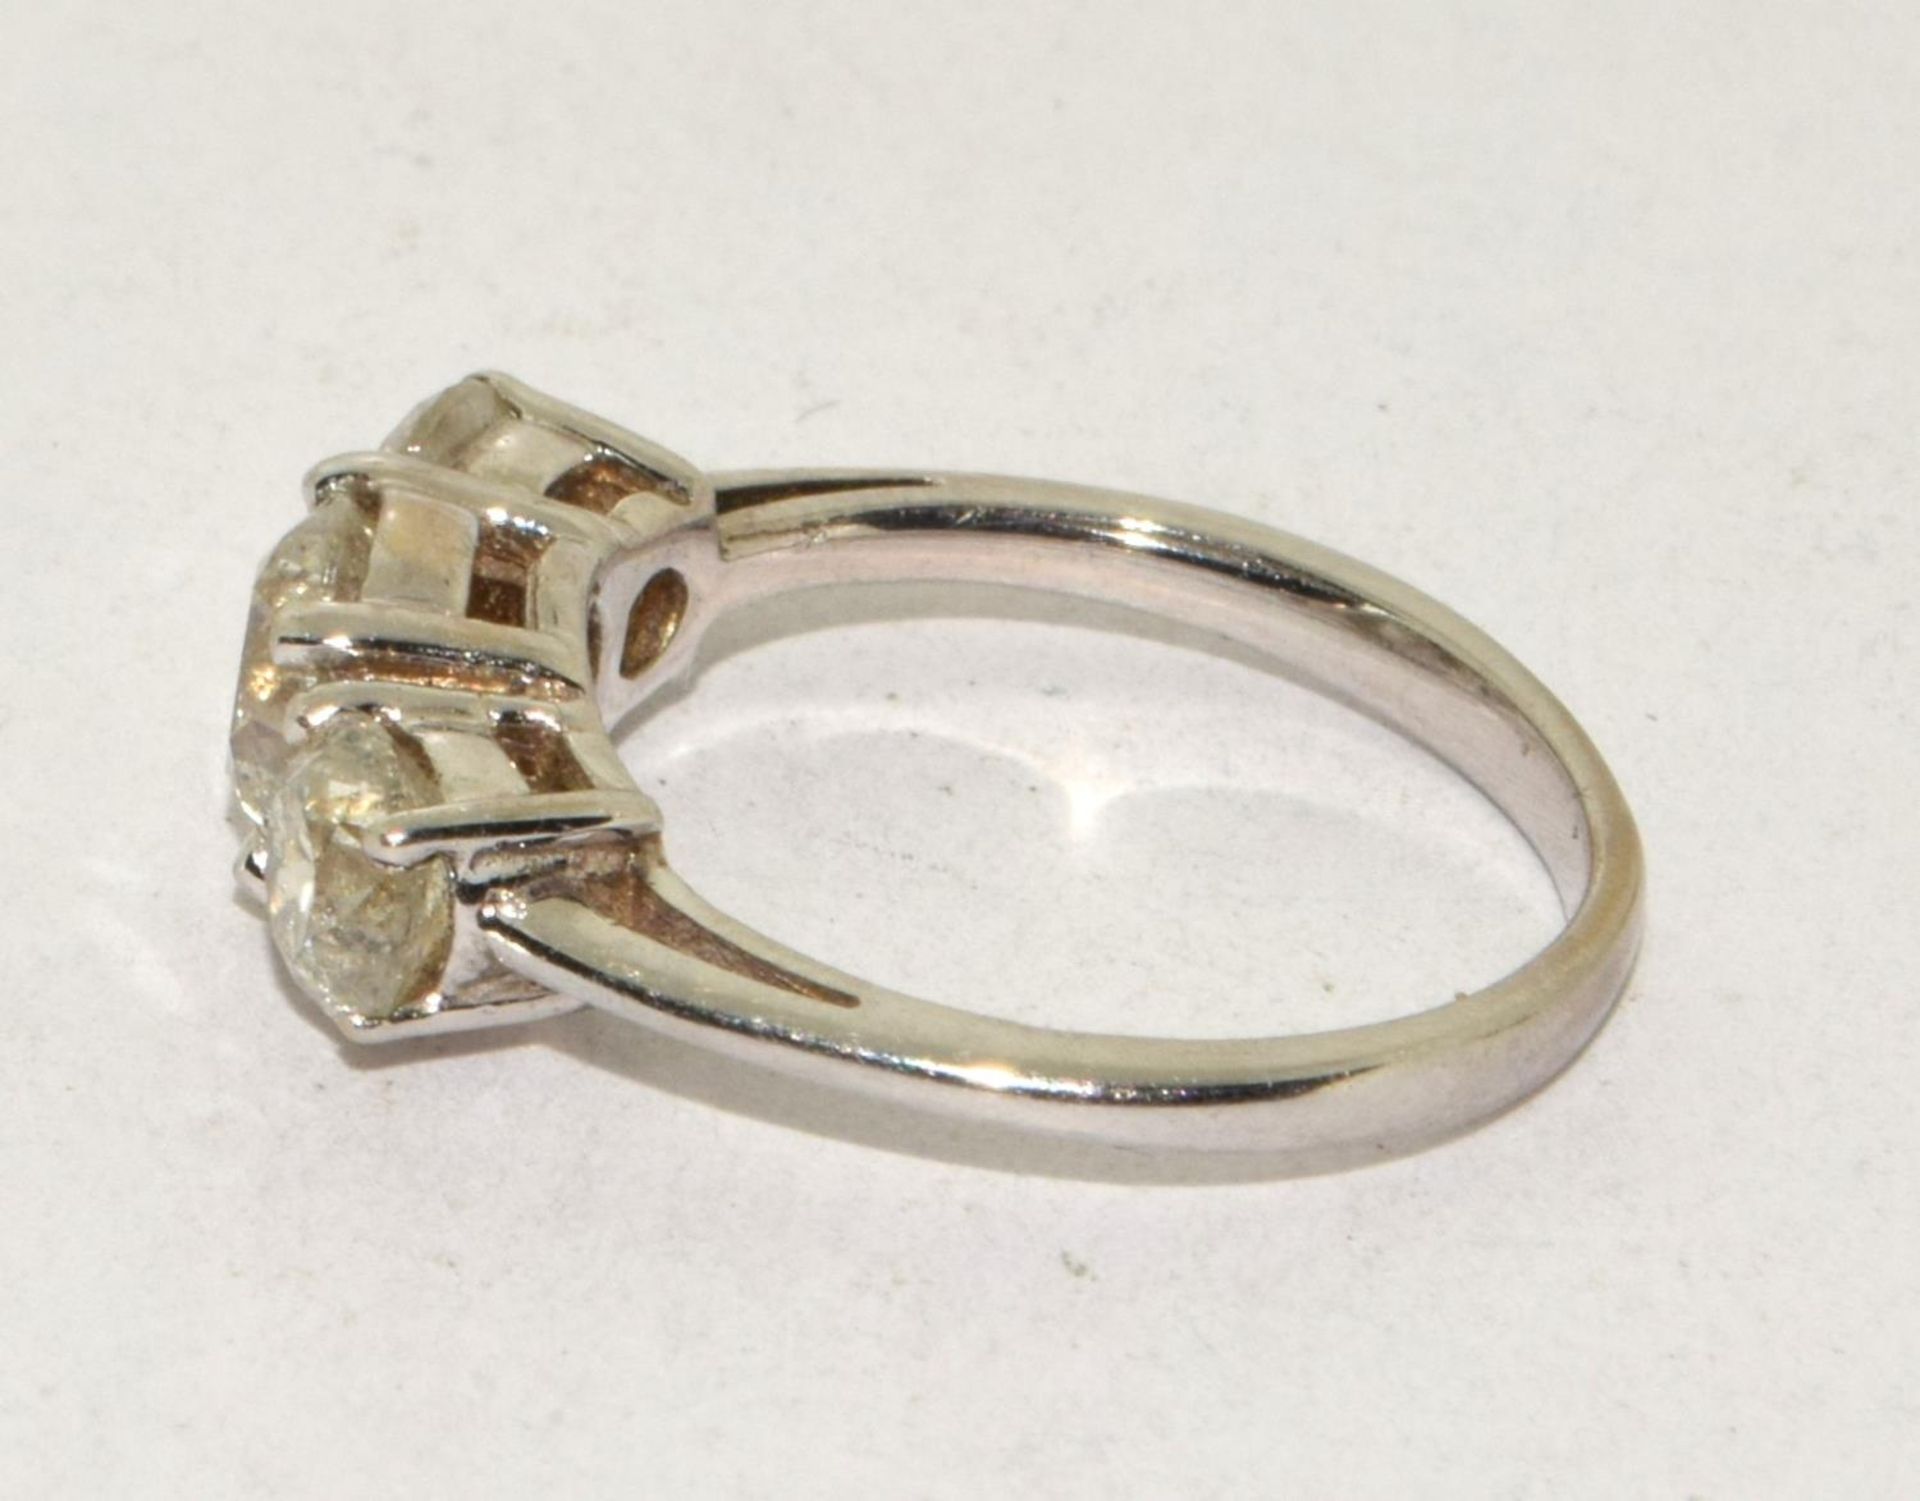 18ct white gold ladies 3 stone trilogy ring approx 2ct diamonds size K - Image 5 of 5